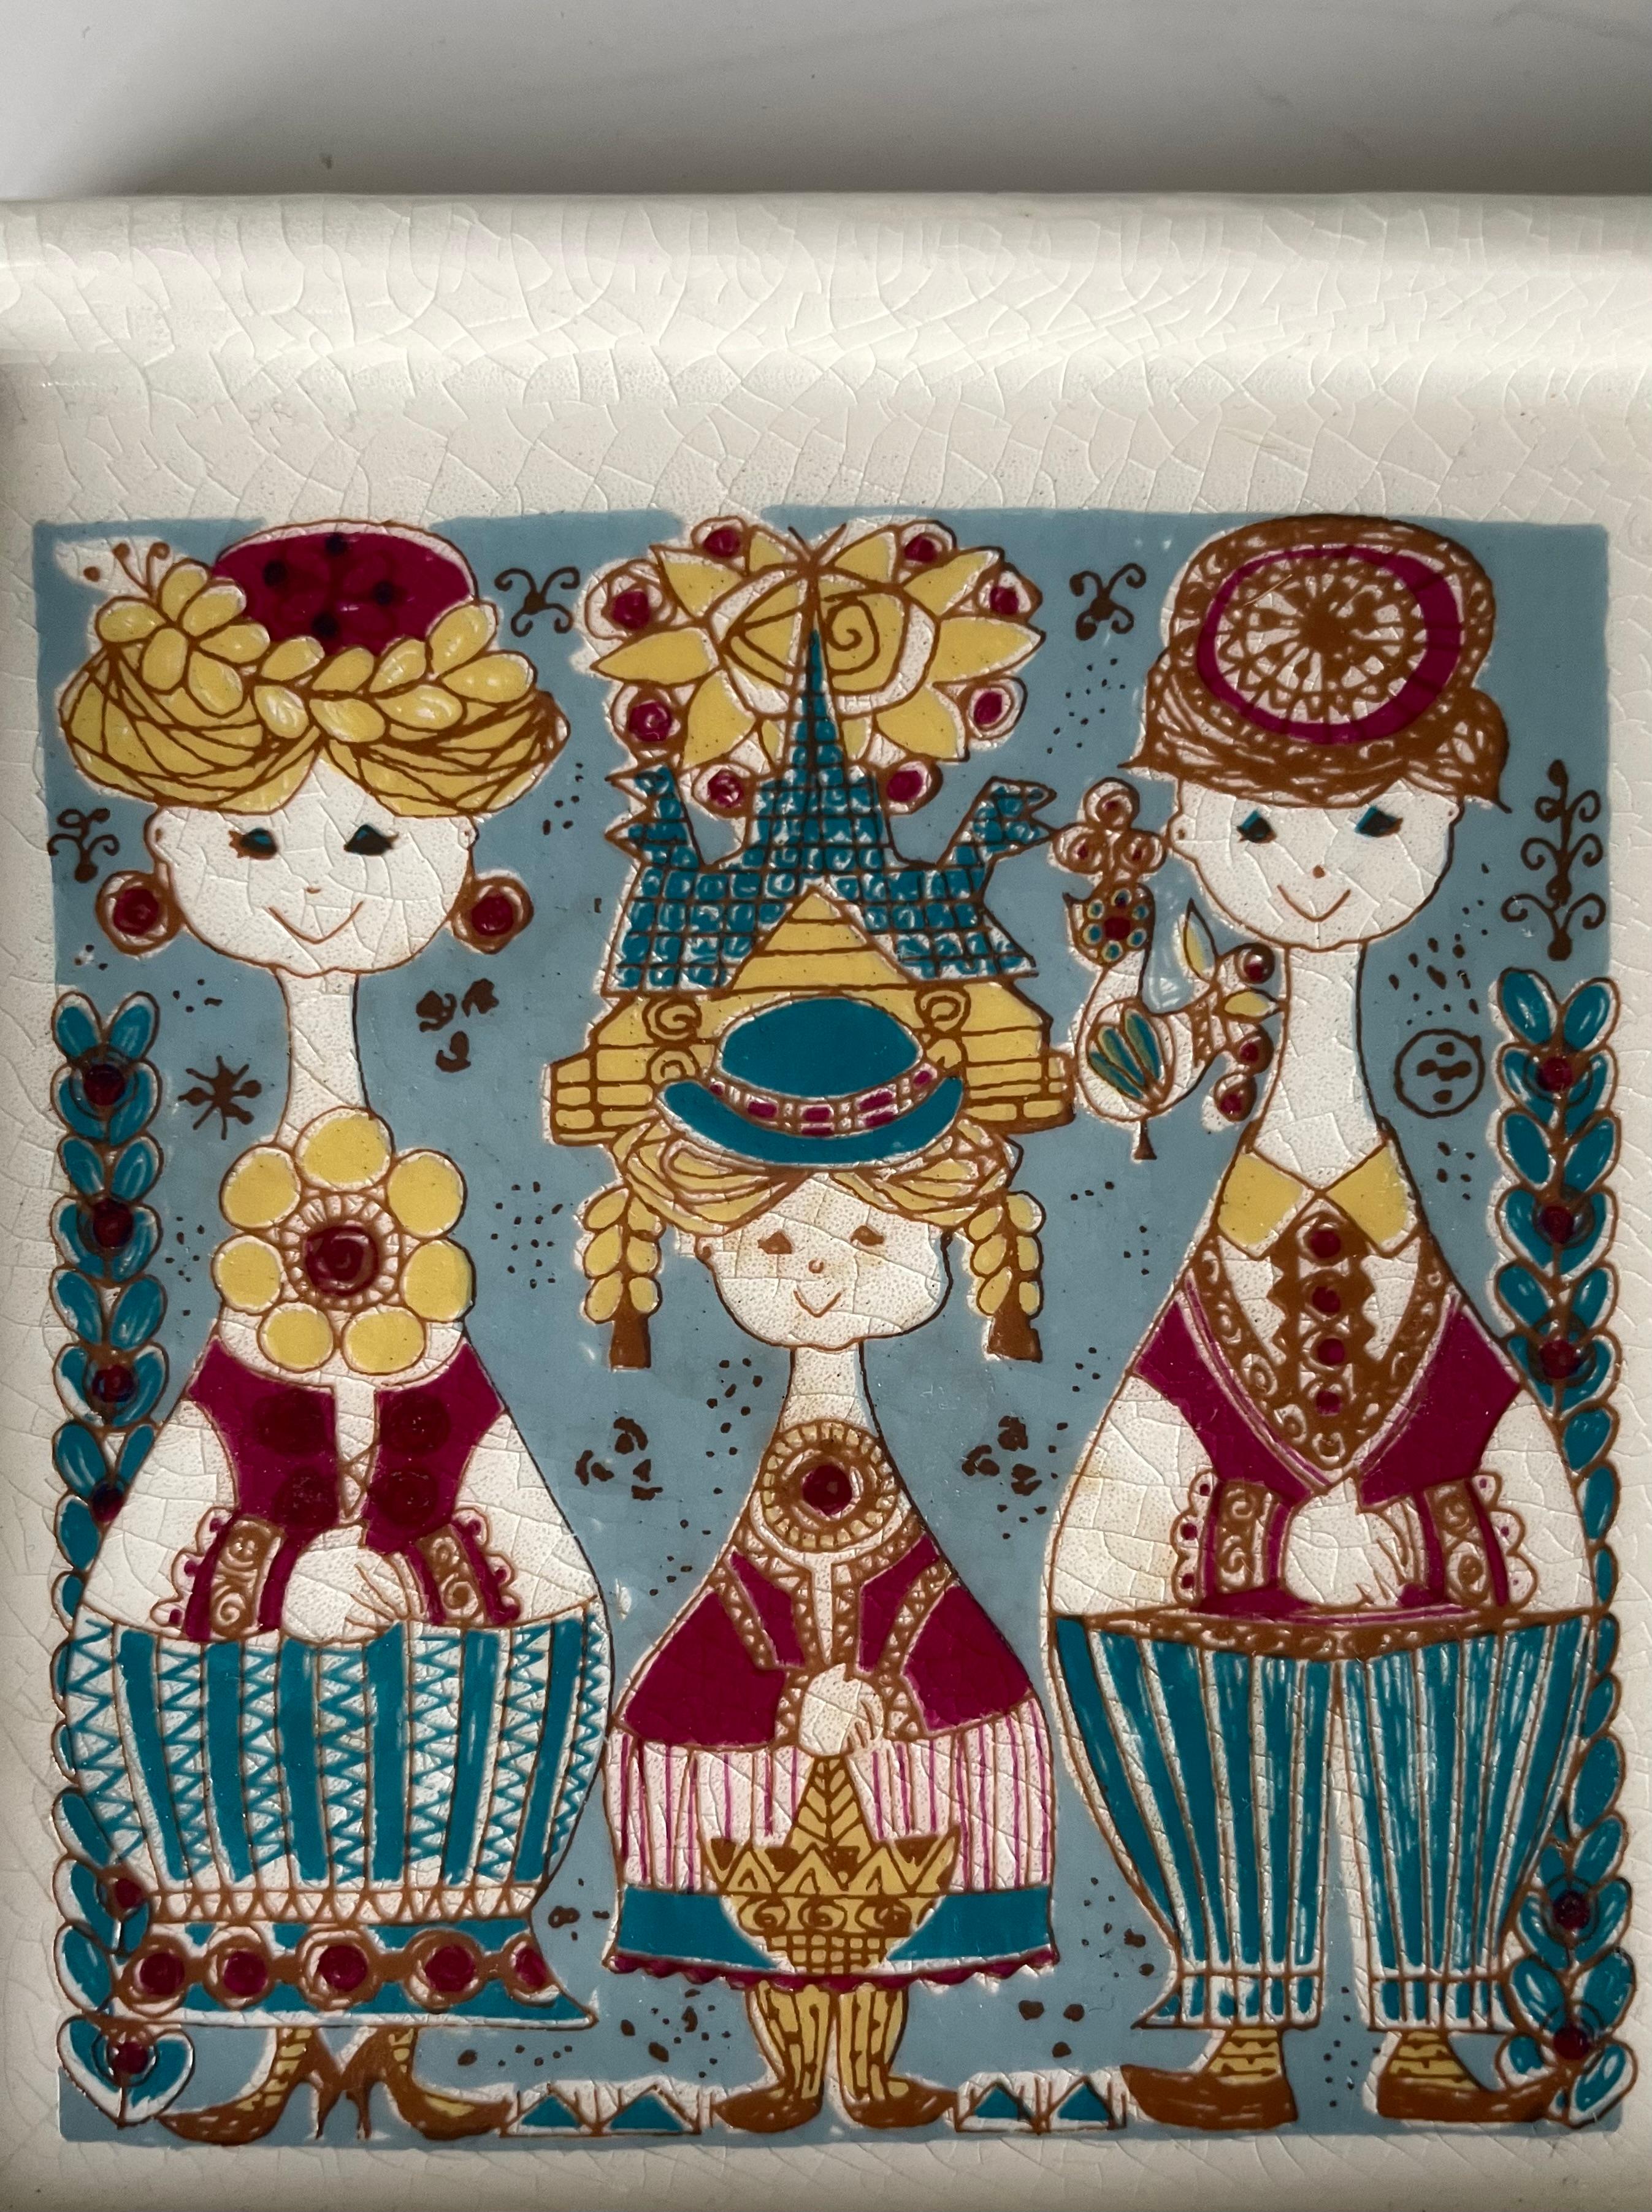 Square shaped multicolored decorative vide poche designed by Inger Waage (1923-1995) for Stavangerflint in the late 1950s-early 1960s. Three human figures stand smiling with colorful, patterned clothes and surrounded by flowers and organic shapes. A